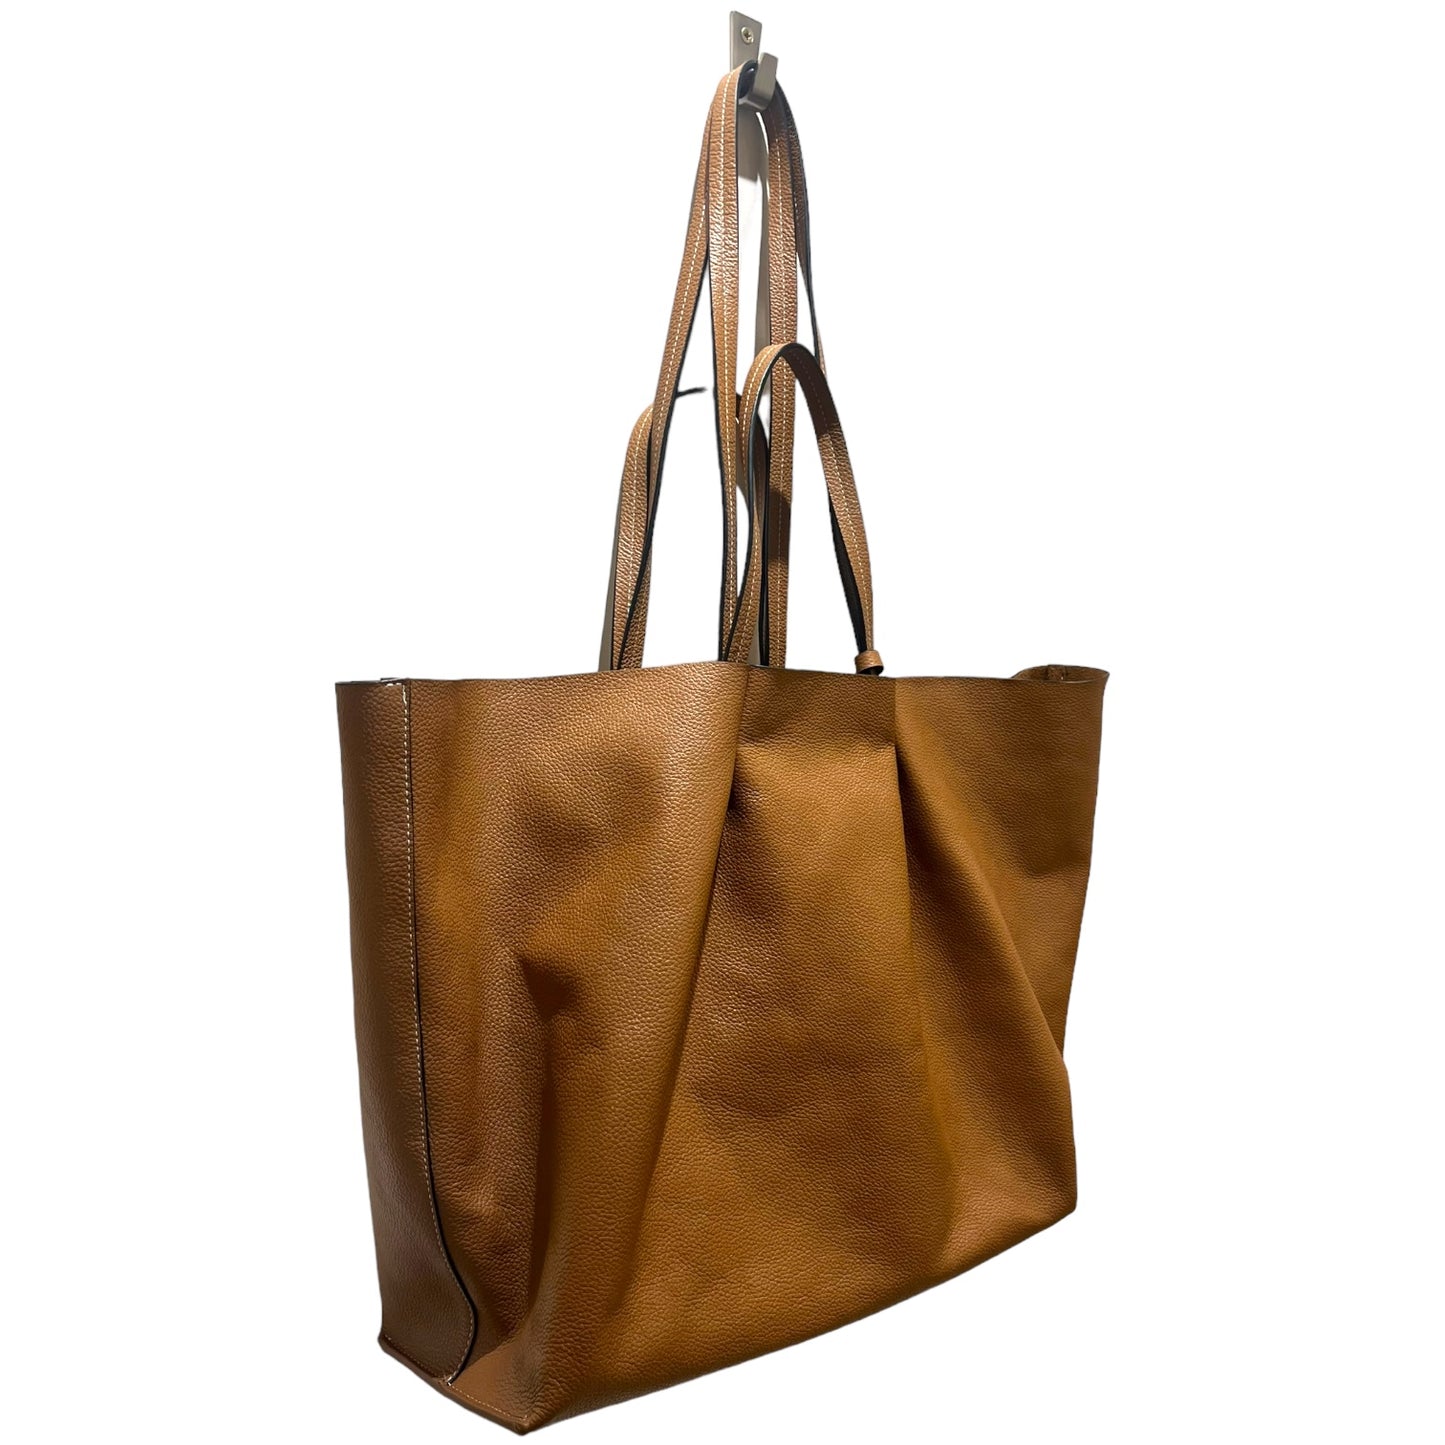 NEW & Other Stories Tan Leather Tote Bag